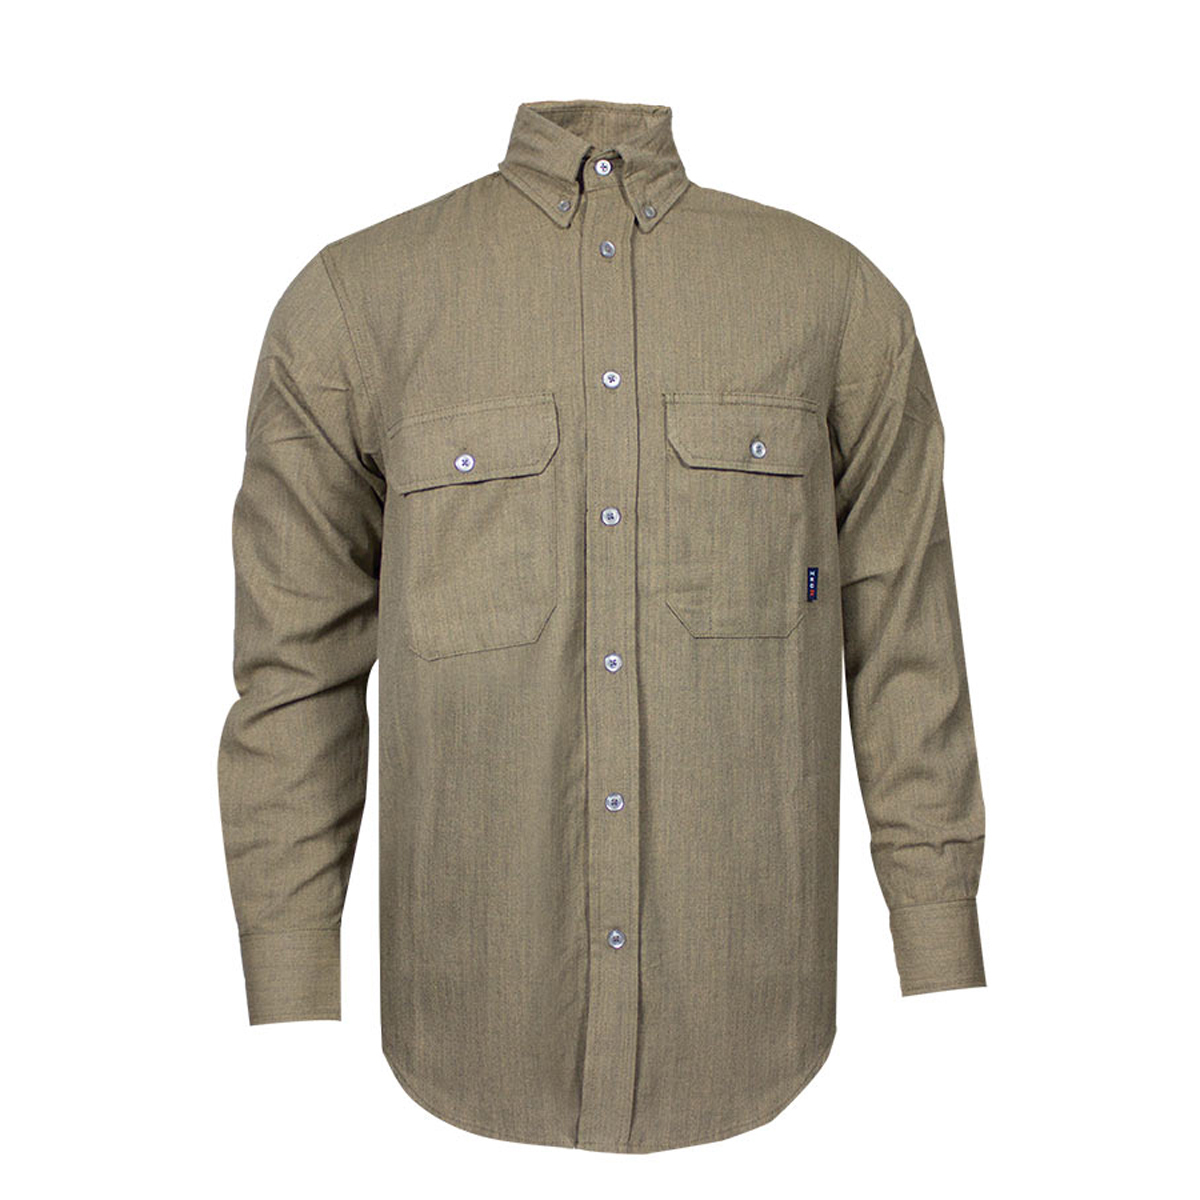 National Safety Apparel 2X Regular Tan TECGEN® CC™ OPF Blend Twill Flame Resistant Work Shirt With Button Front Closure